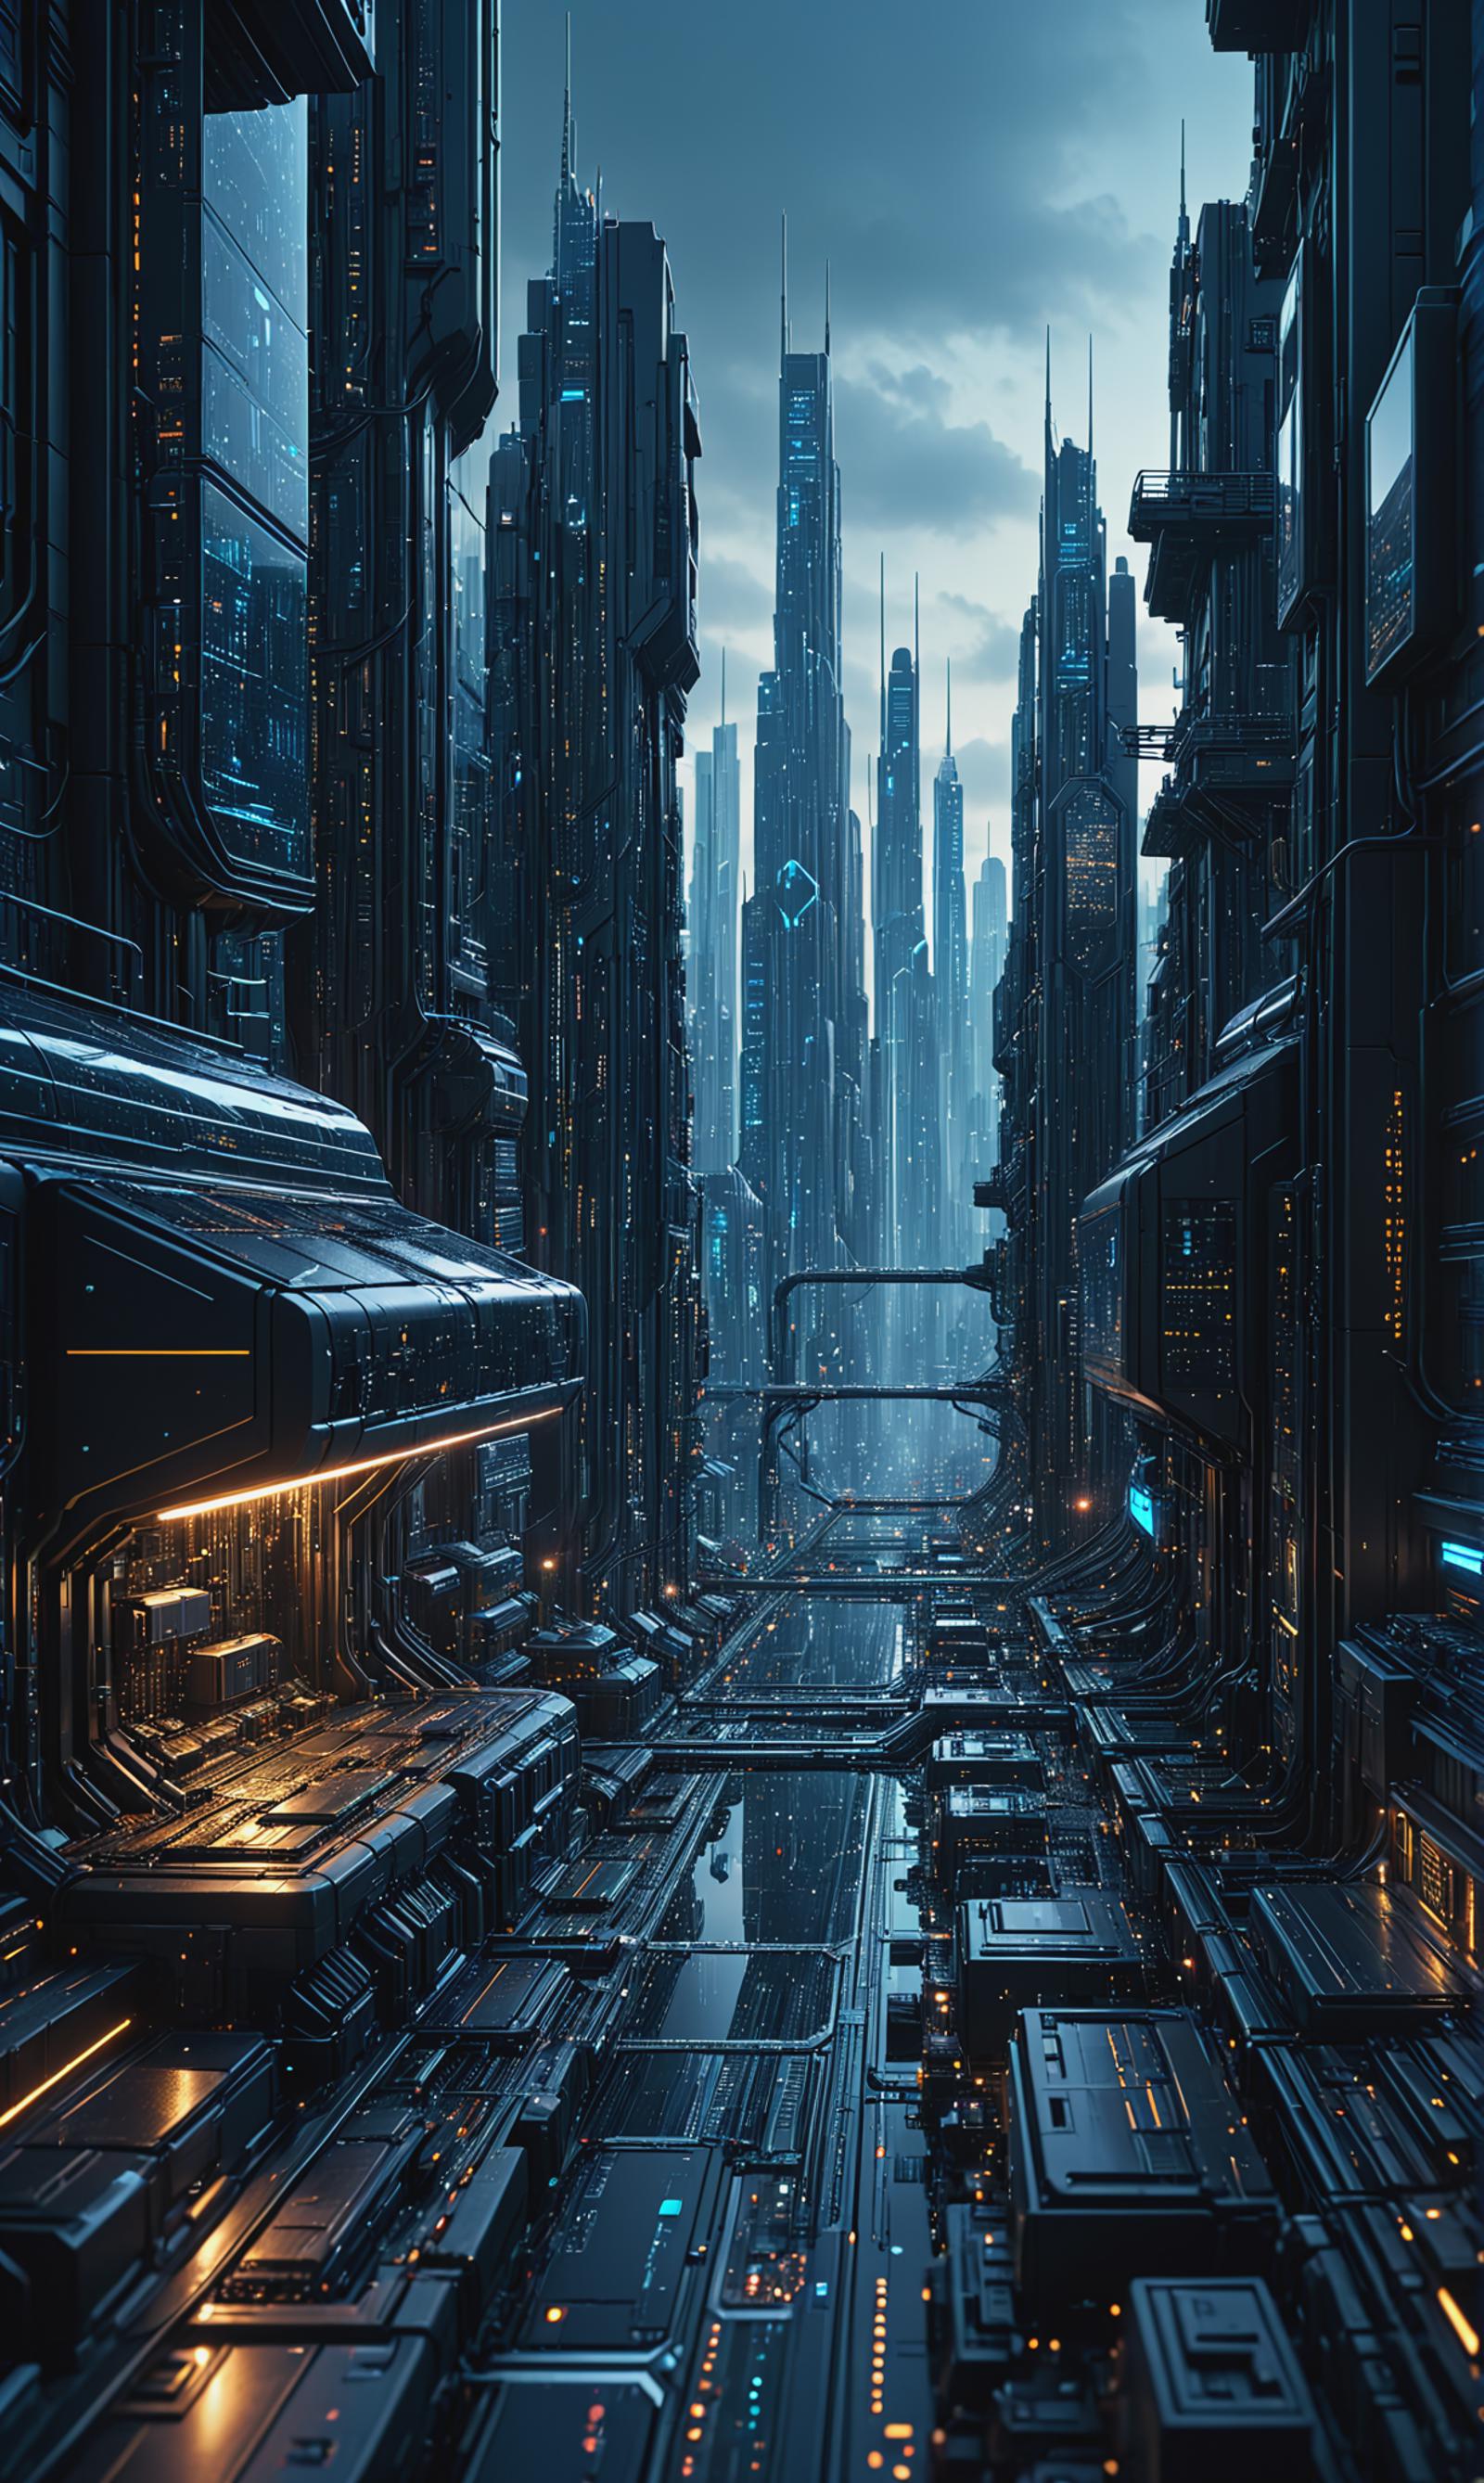 A Futuristic Cityscape with a Glowing Sky and Large Buildings